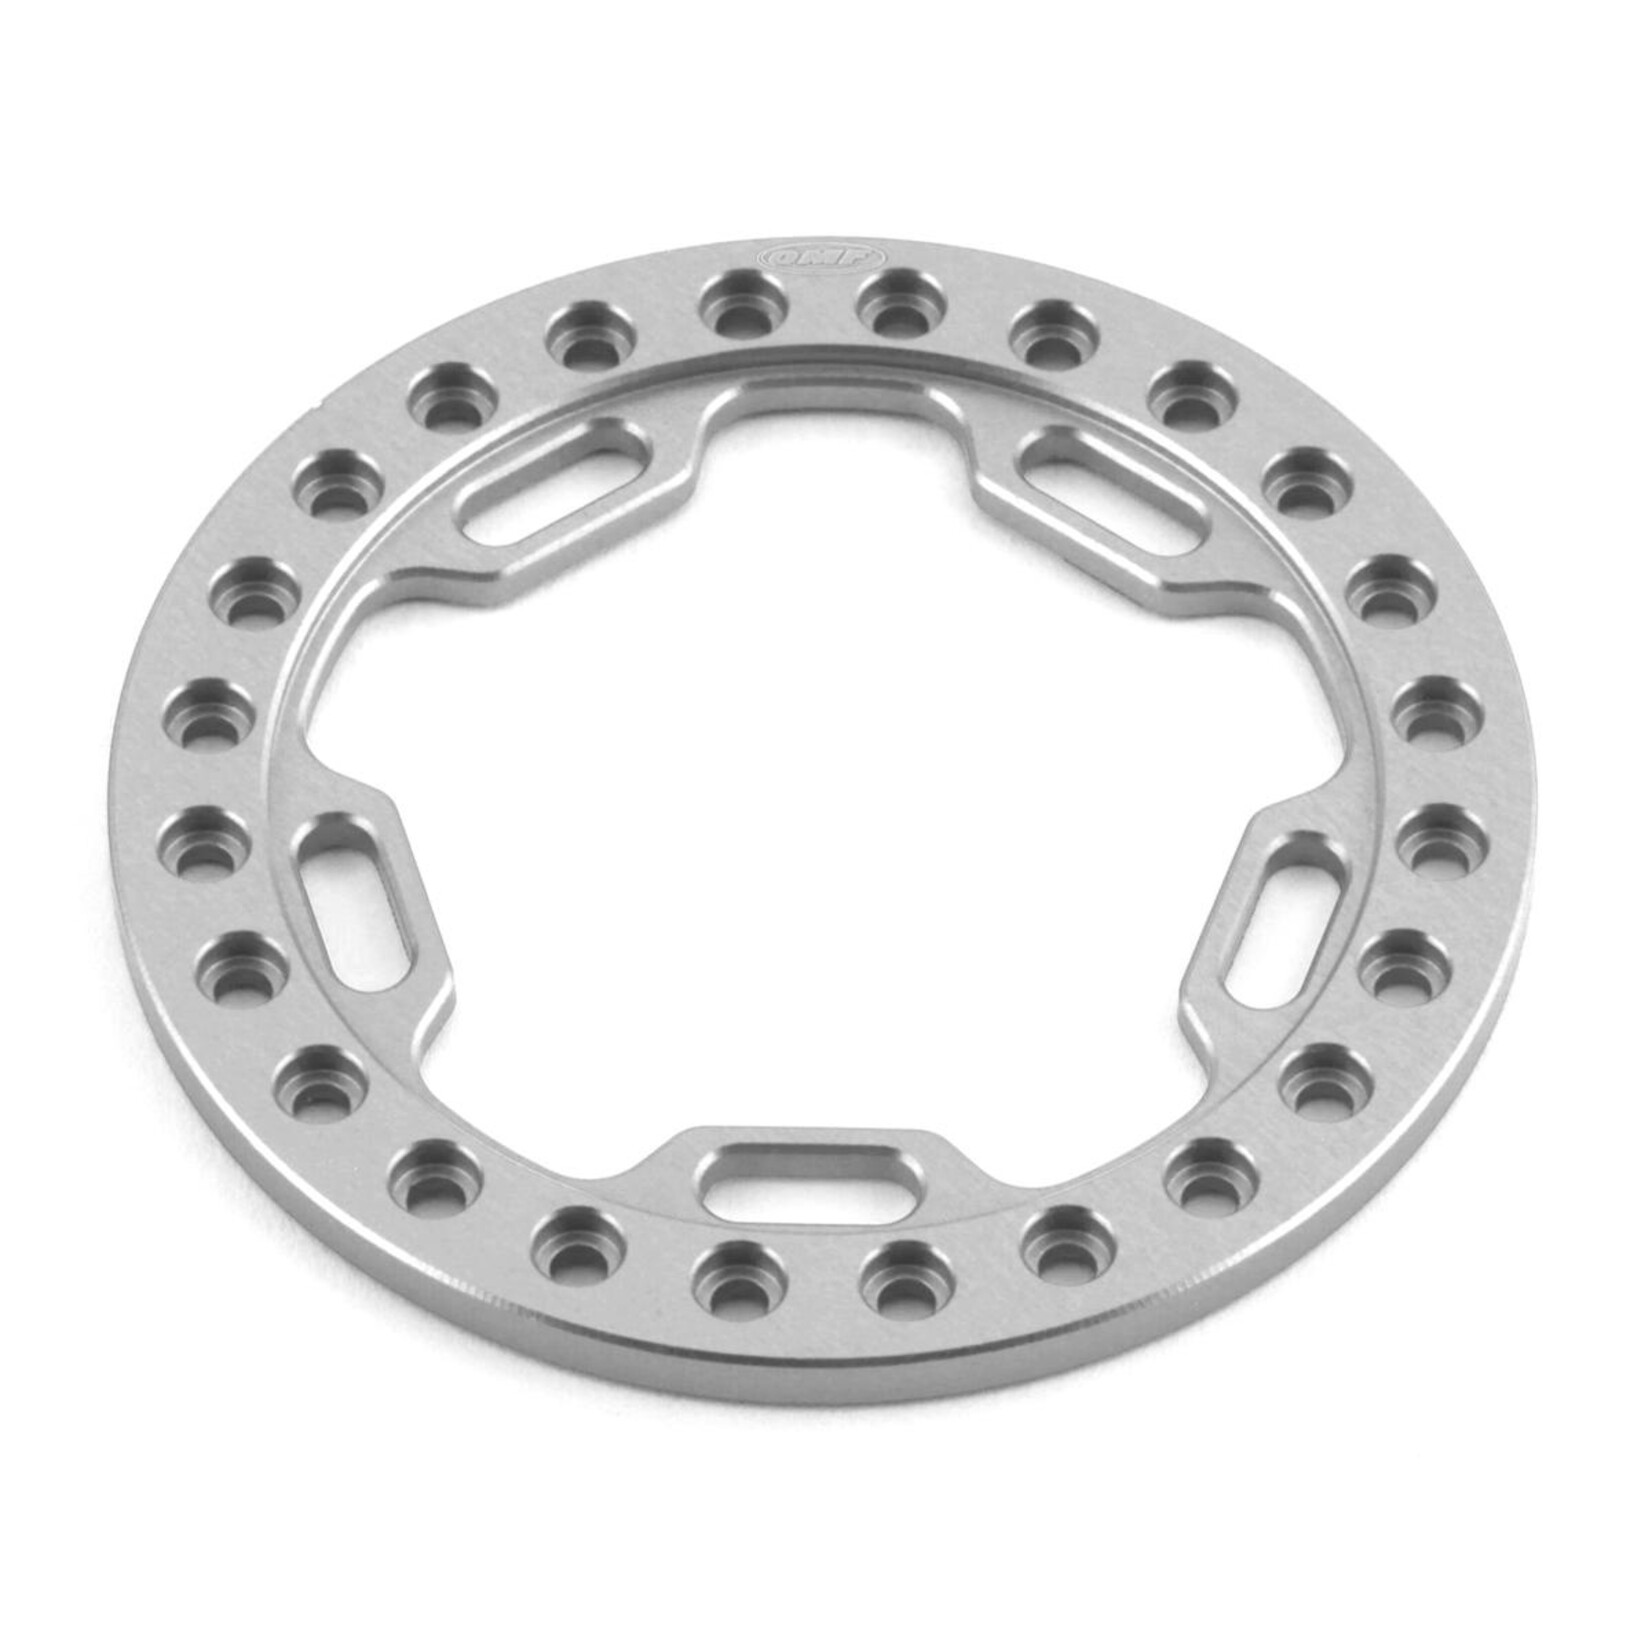 Vanquish Products Vanquish Products OMF 1.9" Phase 5 Beadlock Ring (Silver) #VPS05117